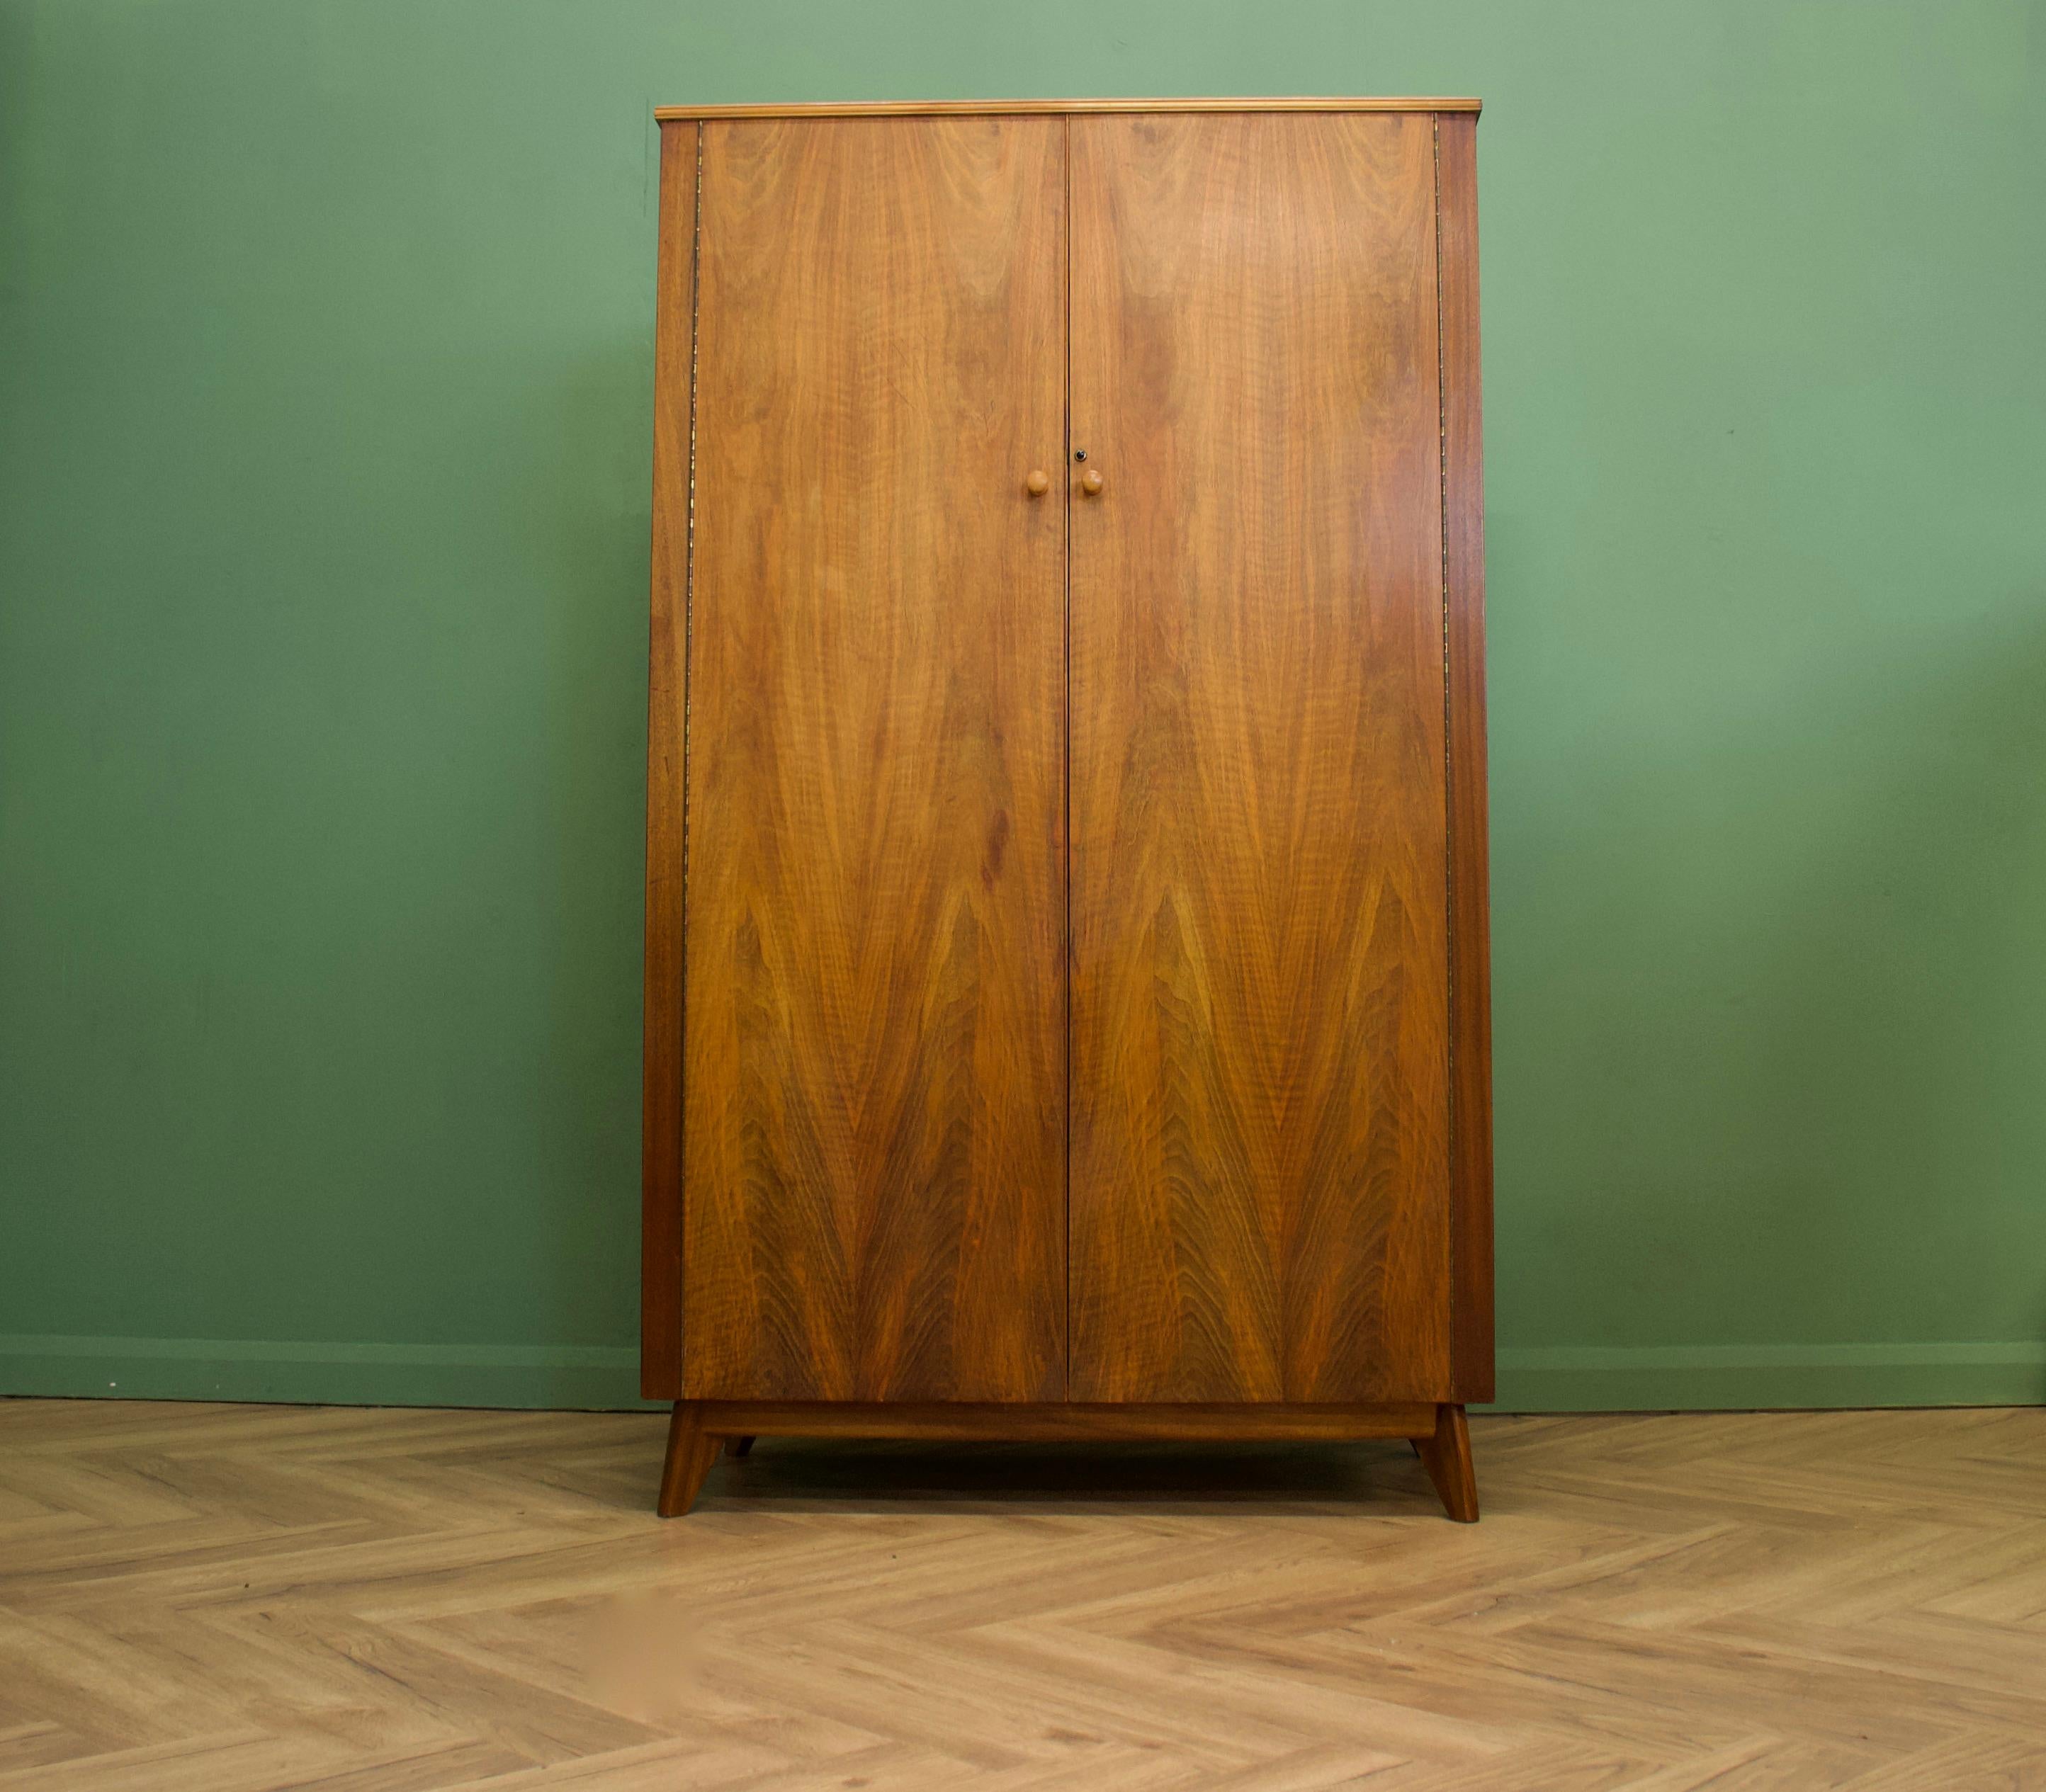 - Mid-Century Modern wardrobe.
- Manufactured Morris of Glasgow in the UK .
- Made from walnut and walnut veneers.
- Featuring a hanging rails and shelves.